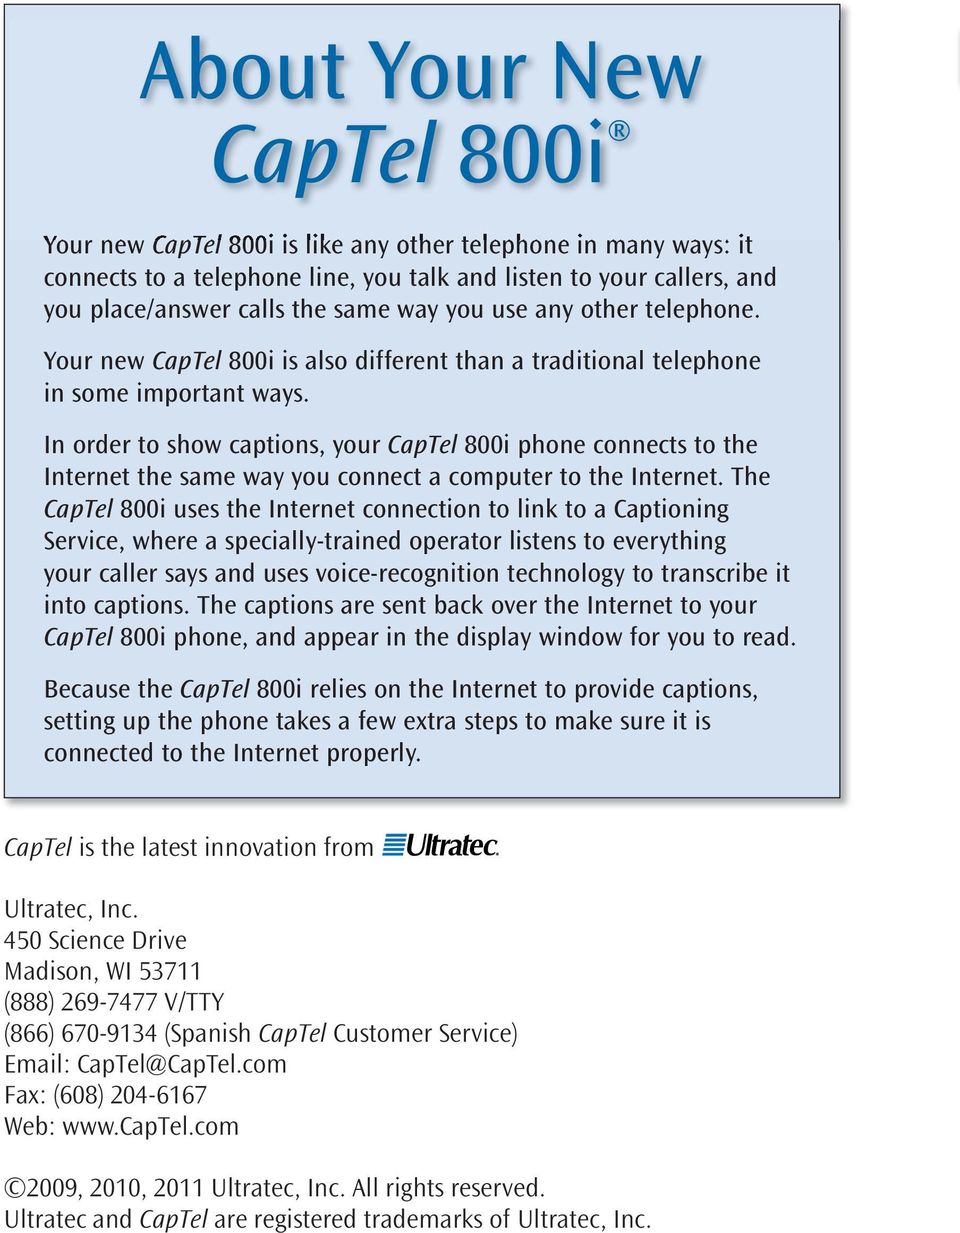 In order to show captions, your CapTel 800i phone connects to the Internet the same way you connect a computer to the Internet.